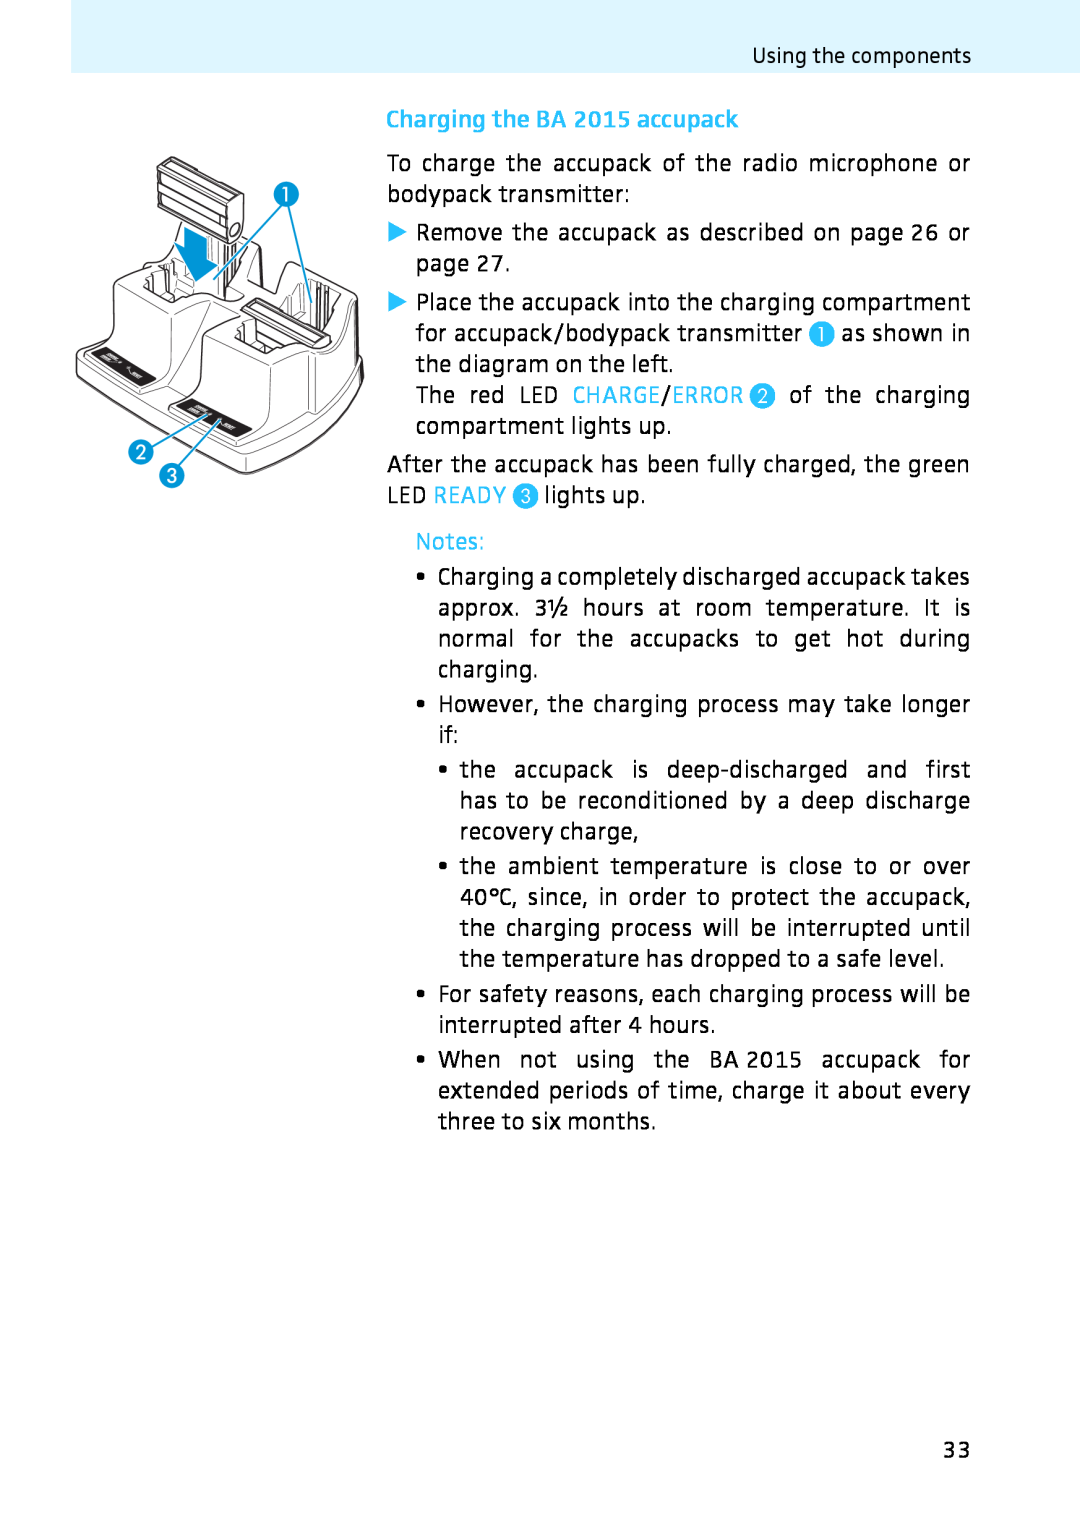 Sennheiser 2020 instruction manual Charging the BA 2015 accupack, However, the charging process may take longer if 